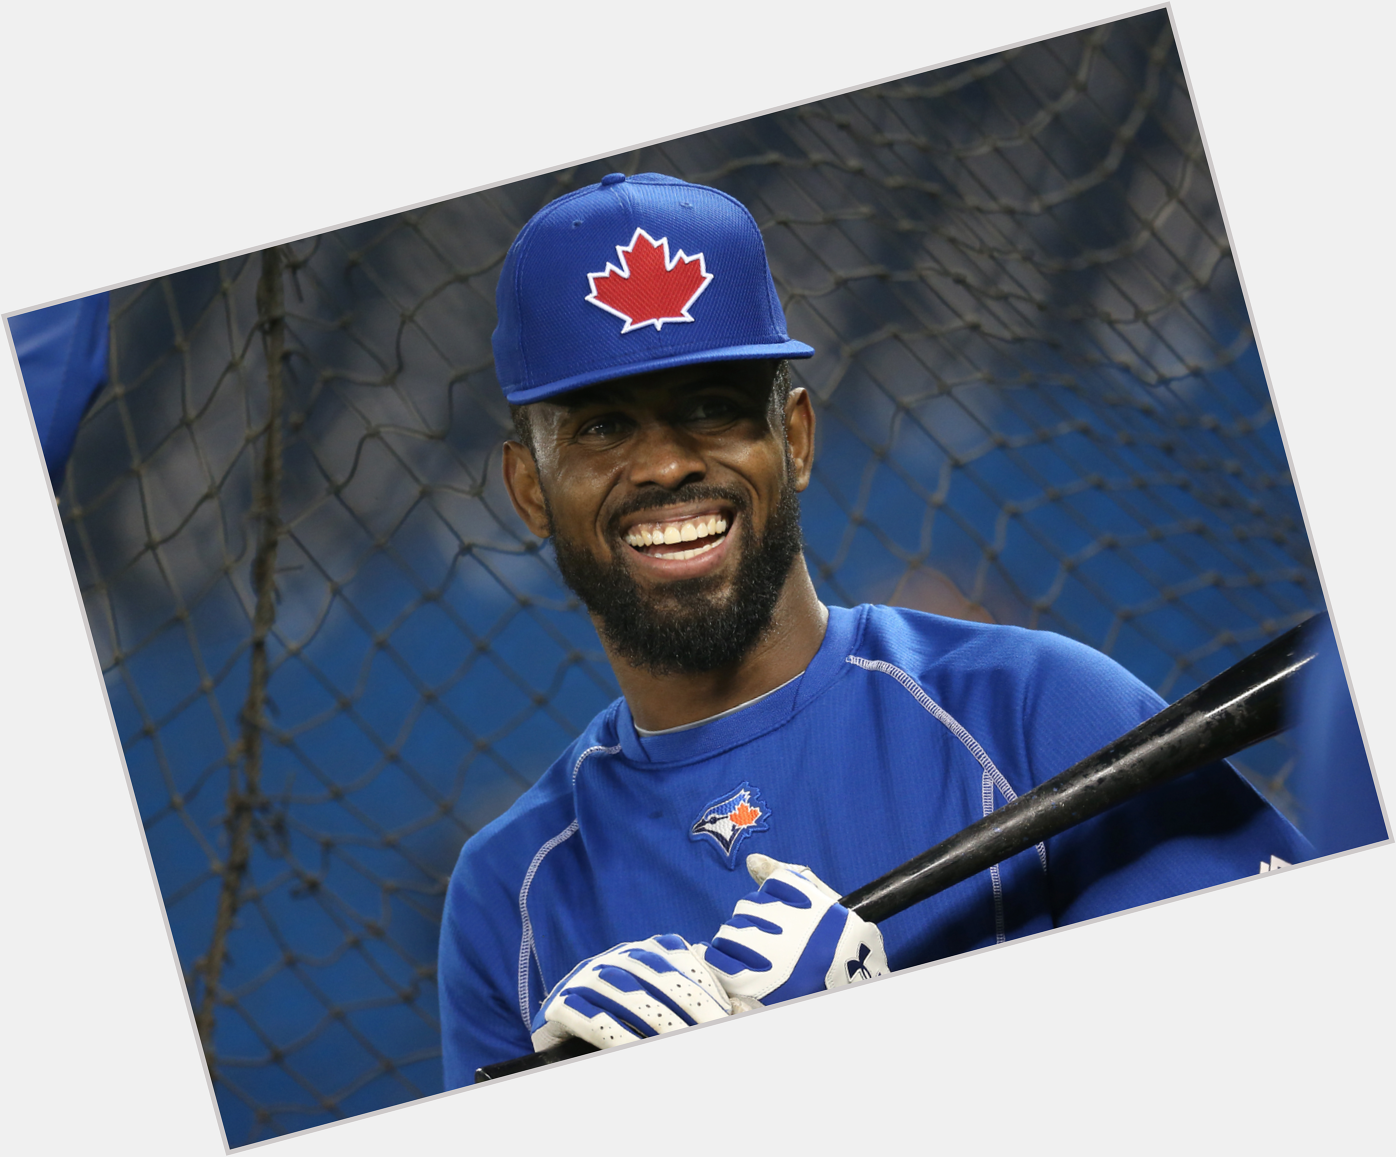 4-time All-Star, 2011 NL Batting Champ, speed & a smile

Happy Birthday to SS Jose Reyes! 